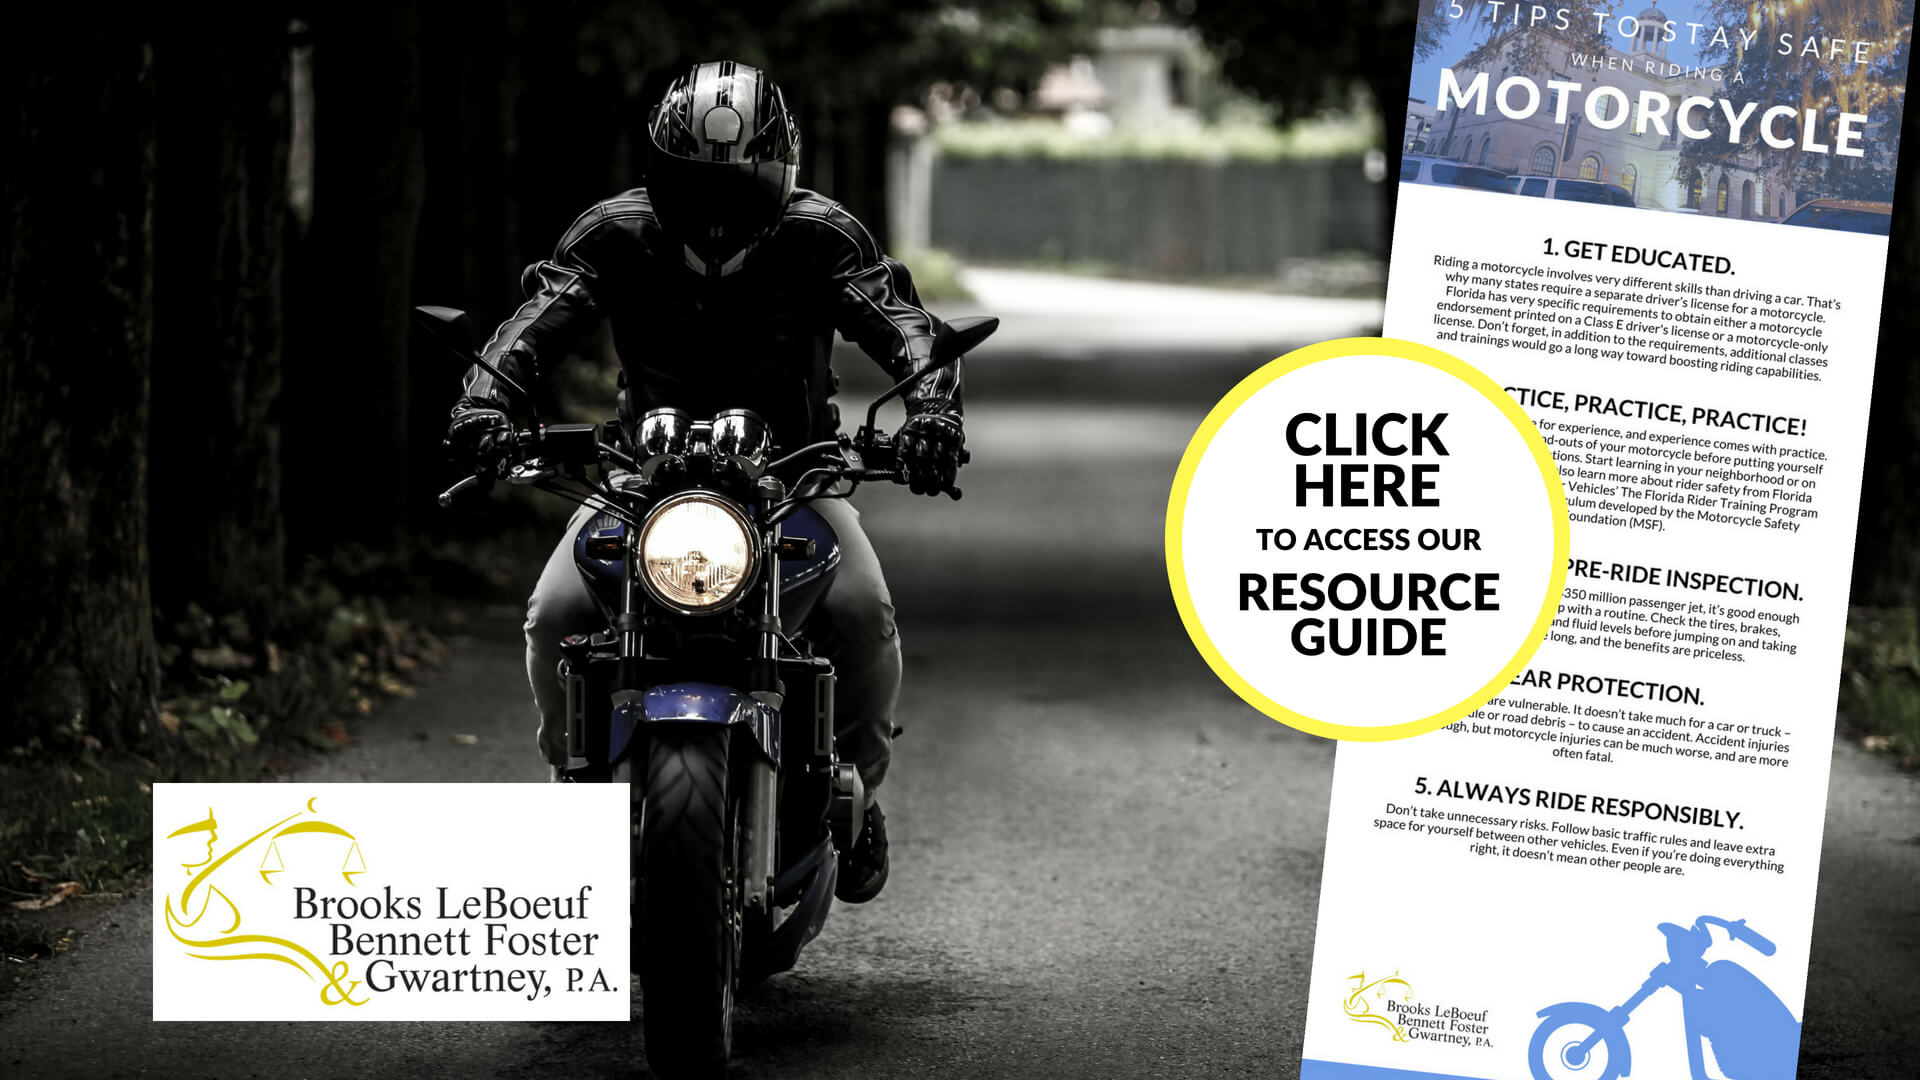 5 Tips to Stay Safe When Riding a Motorcycle